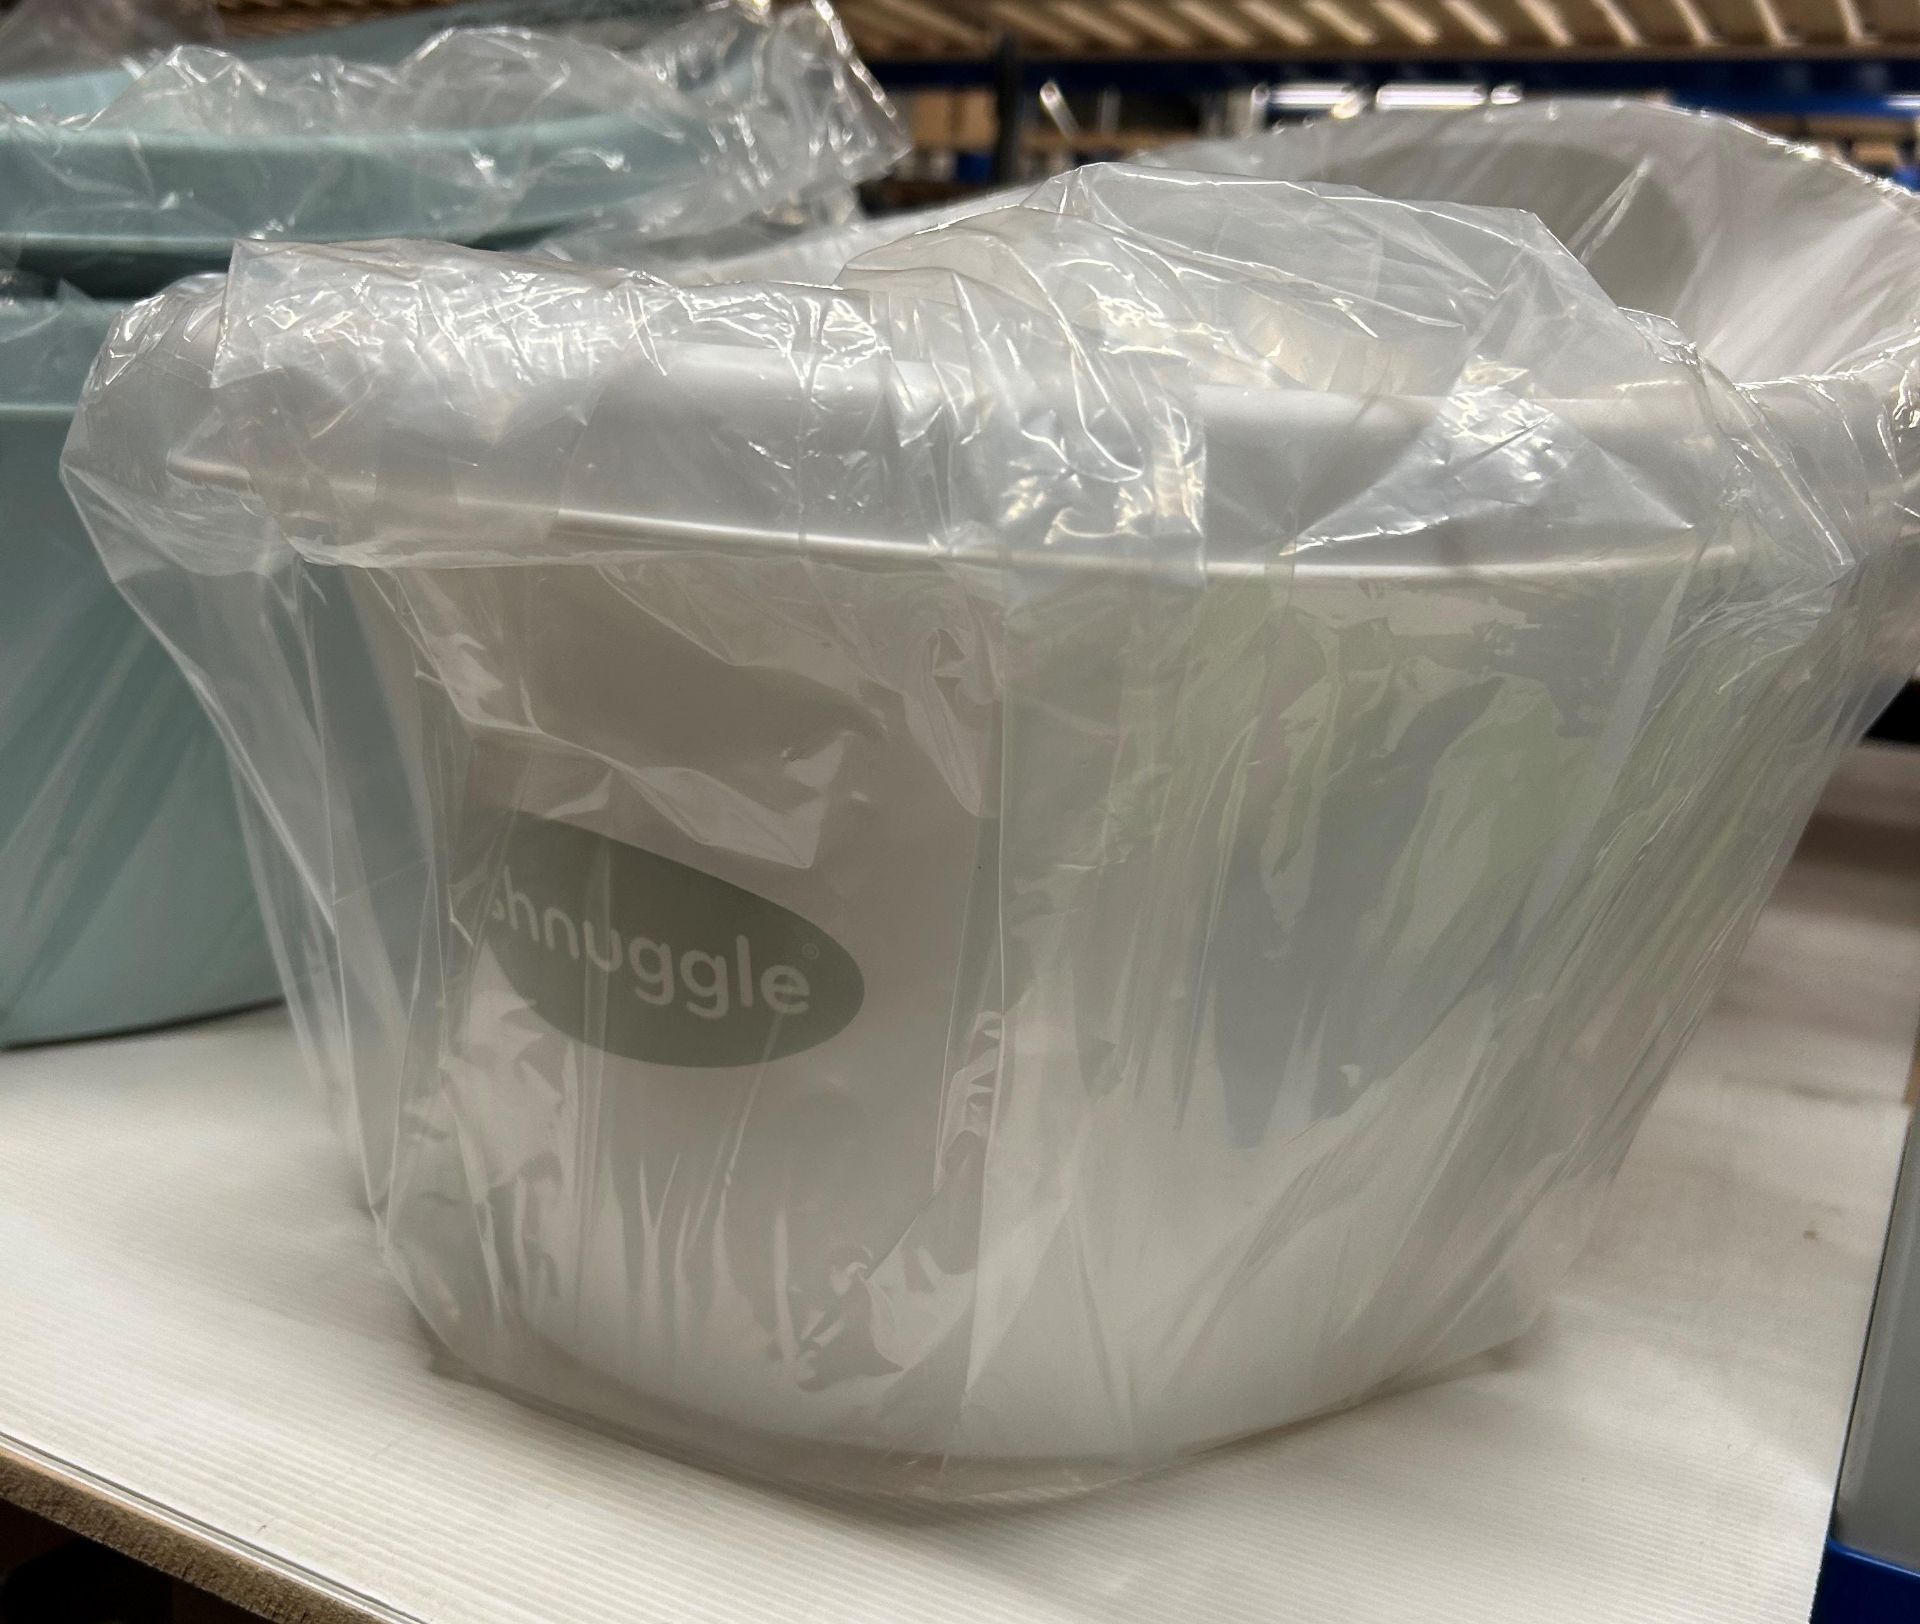 BRAND NEW PACKAGED SHNUGGLE BABY BATH IN WHITE/GREY RRP £20 (Saleroom location: F12) - Image 3 of 3